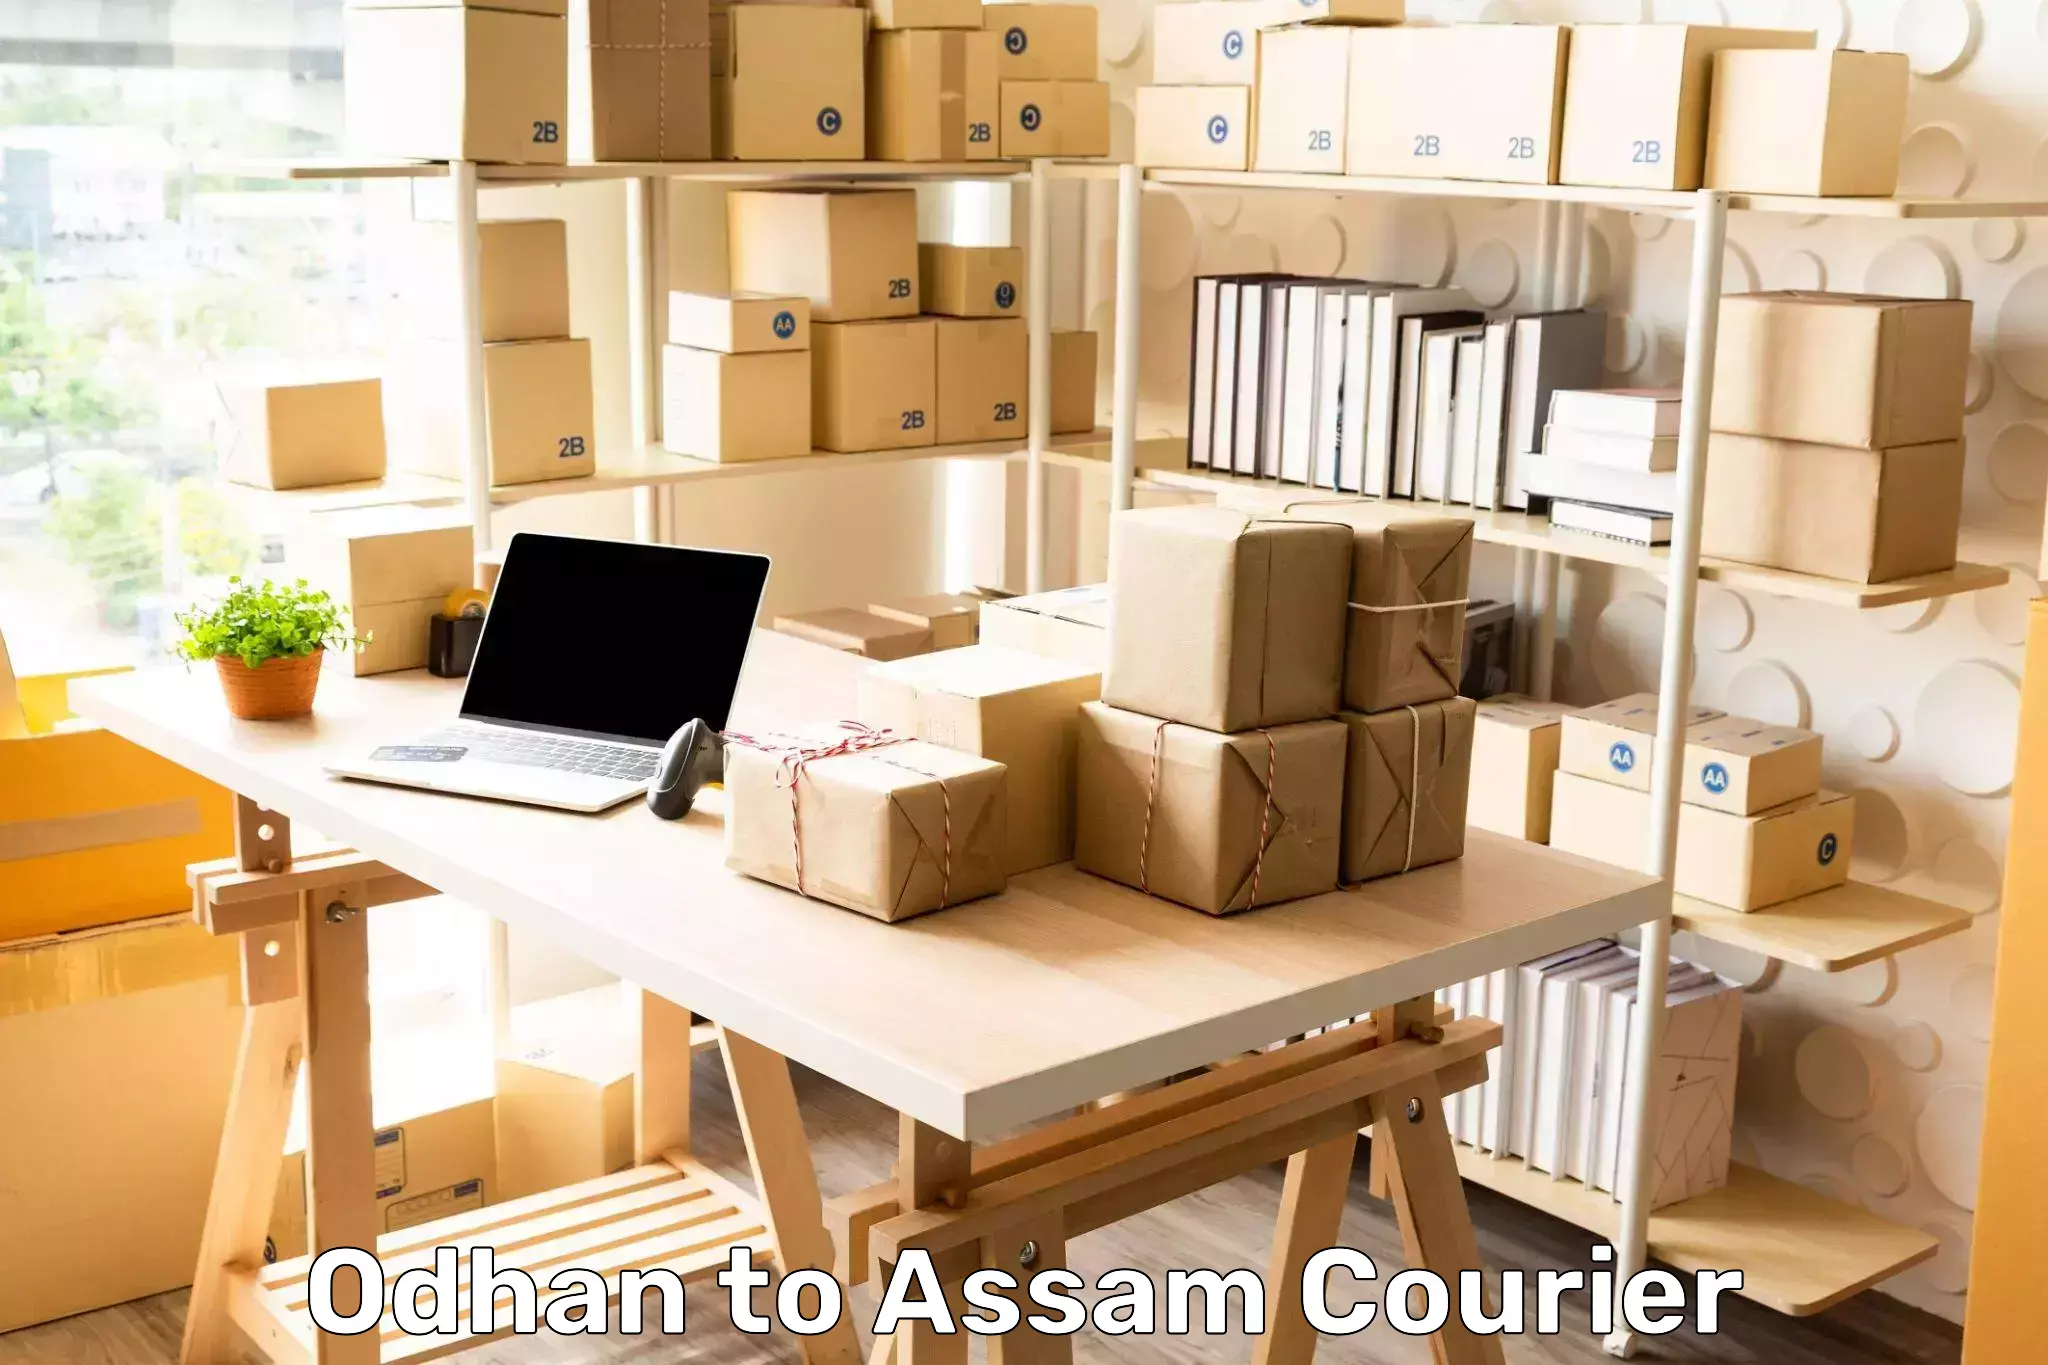 Advanced shipping technology Odhan to Lala Assam